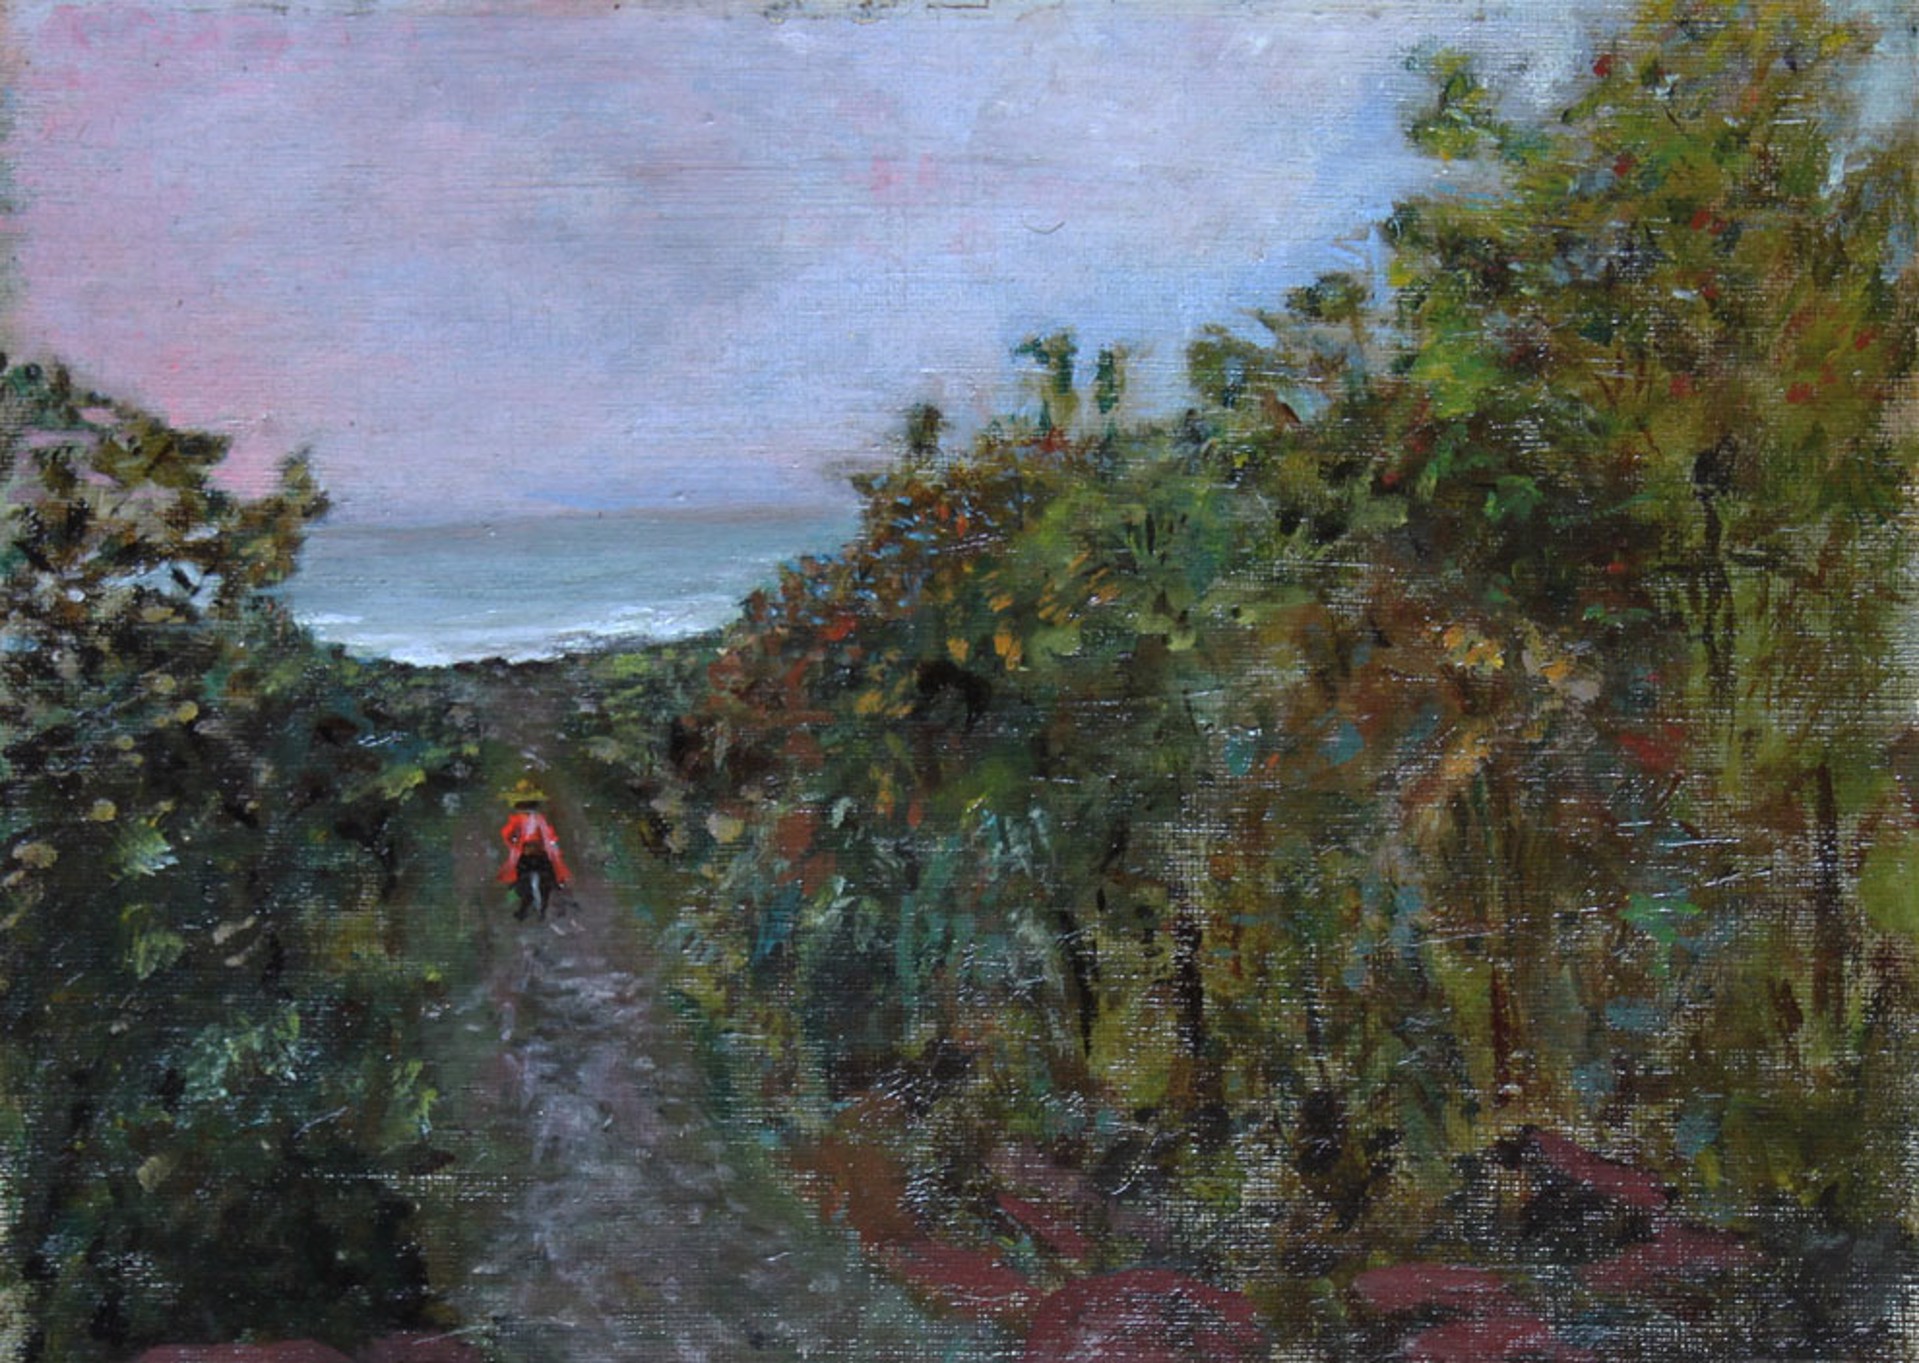 Trail to the Bay by D. Howard Hitchcock